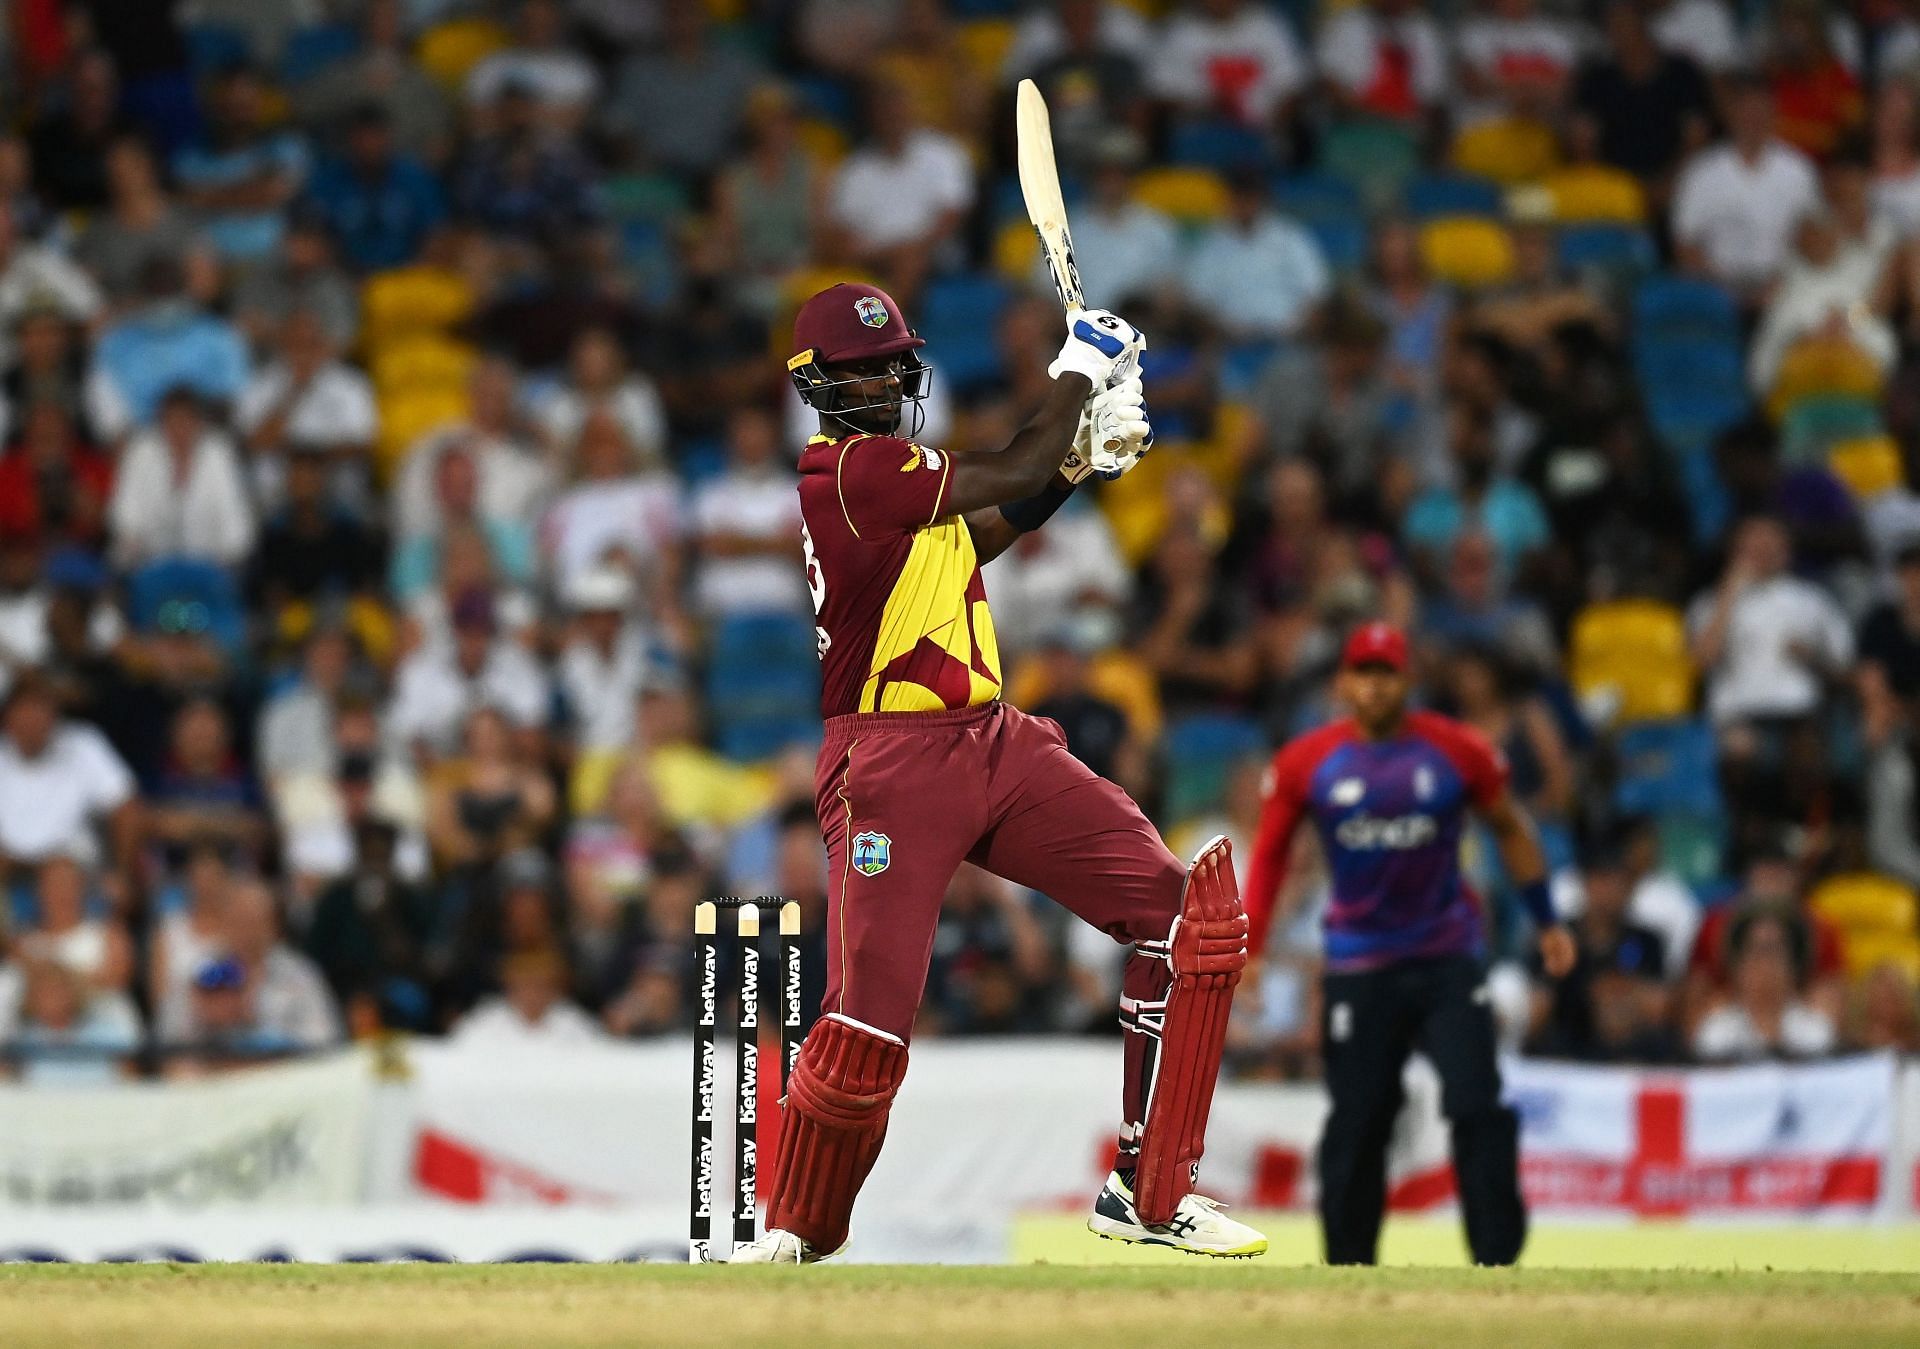 The former Windies skipper batting against England. Pic: Getty Images